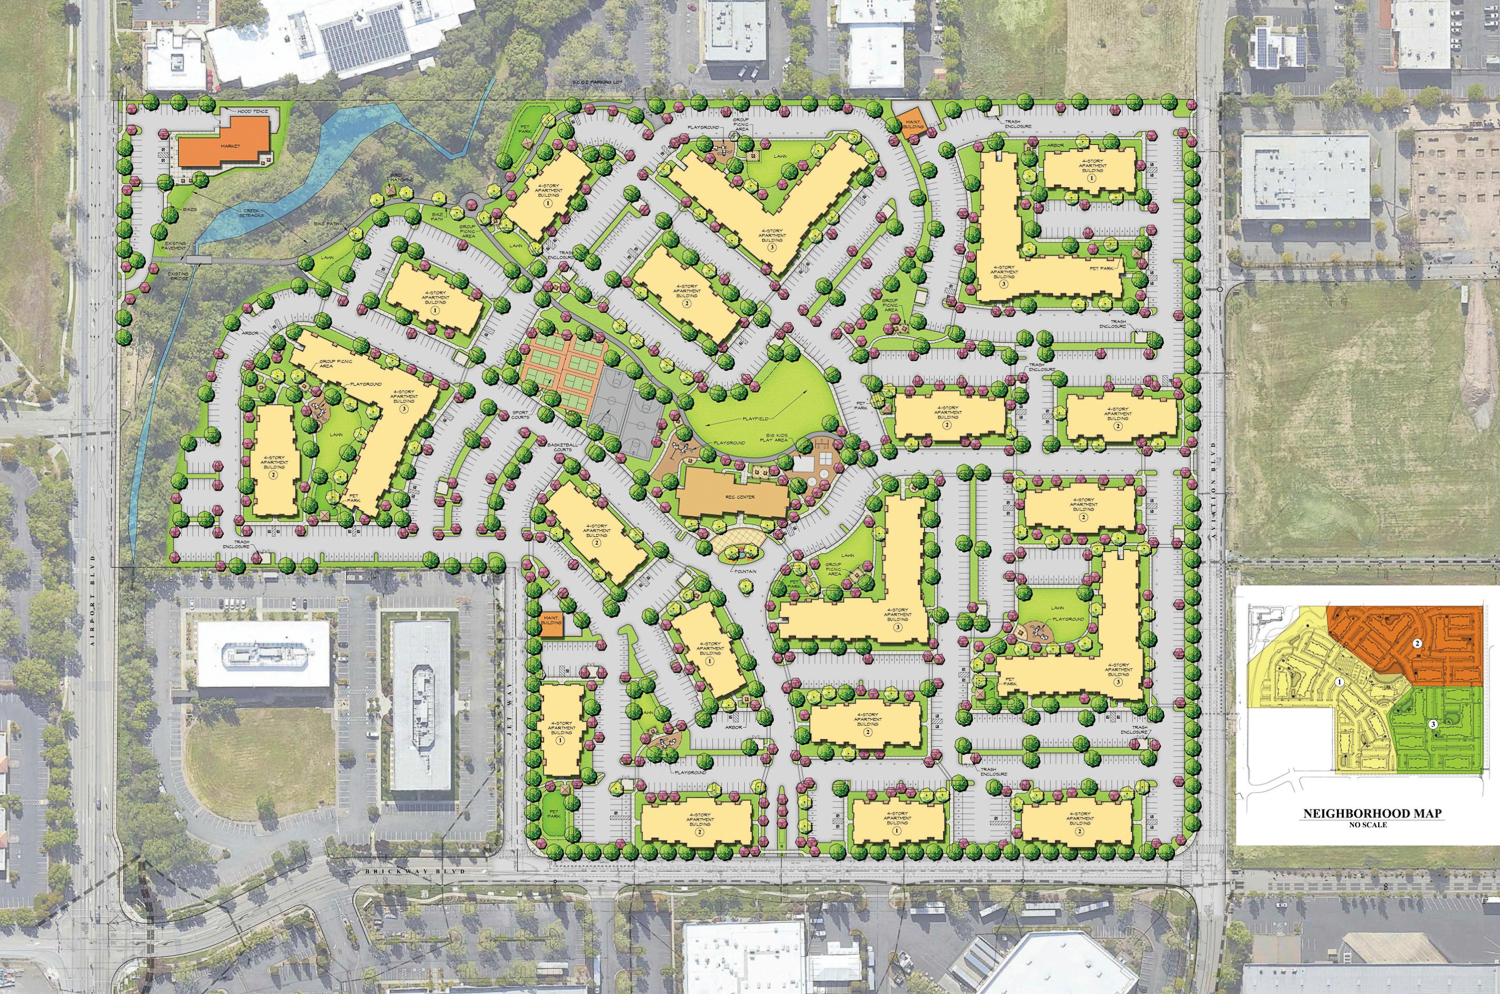 3843 Brickway Boulevard site map, illustration by B.Hills Architecture